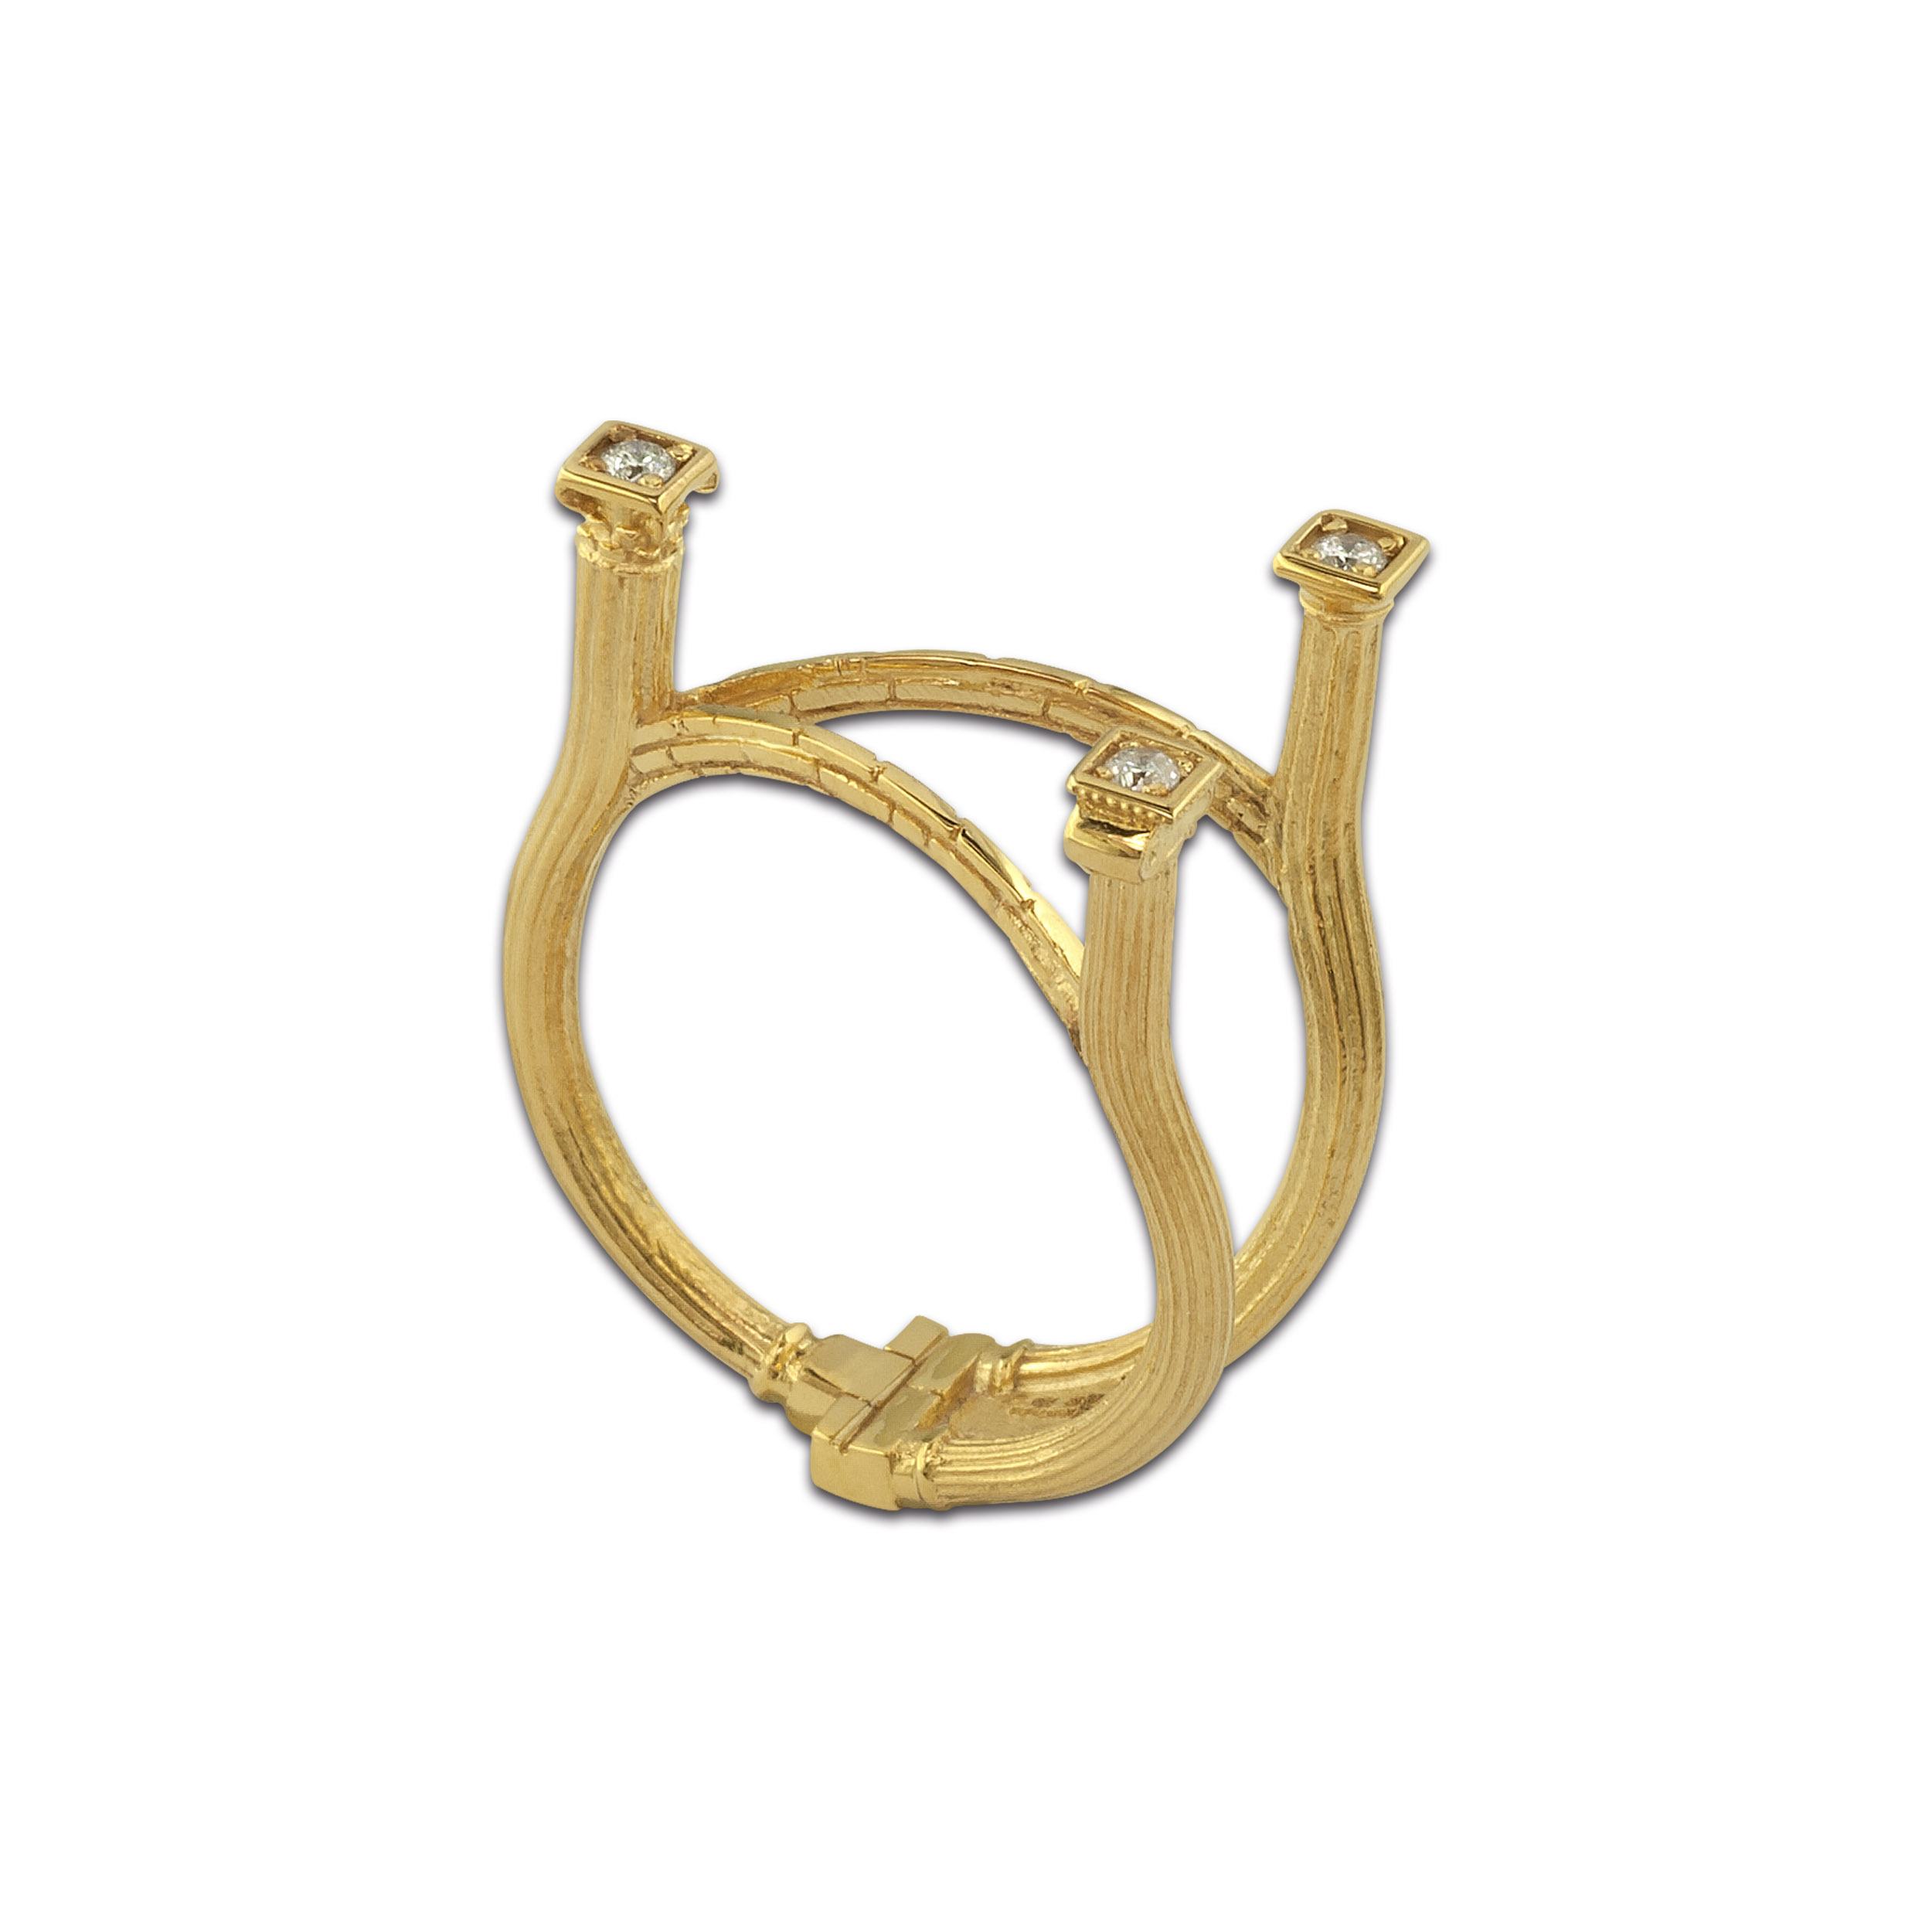 Triple Period gold Ring with diamonds